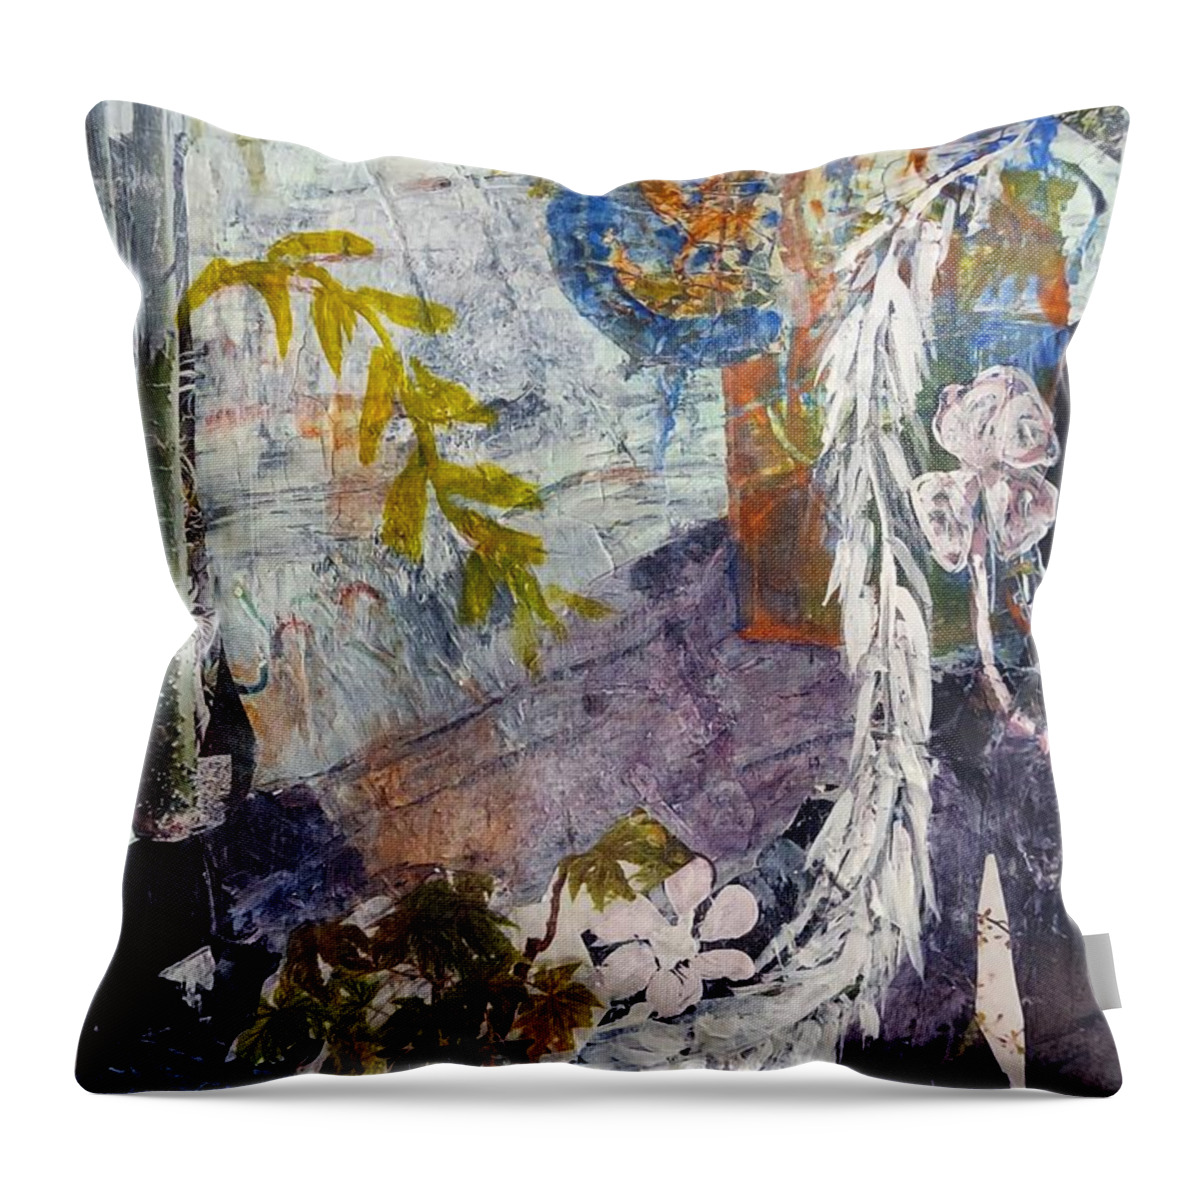 Garden Throw Pillow featuring the mixed media Vines by Suzanne Berthier